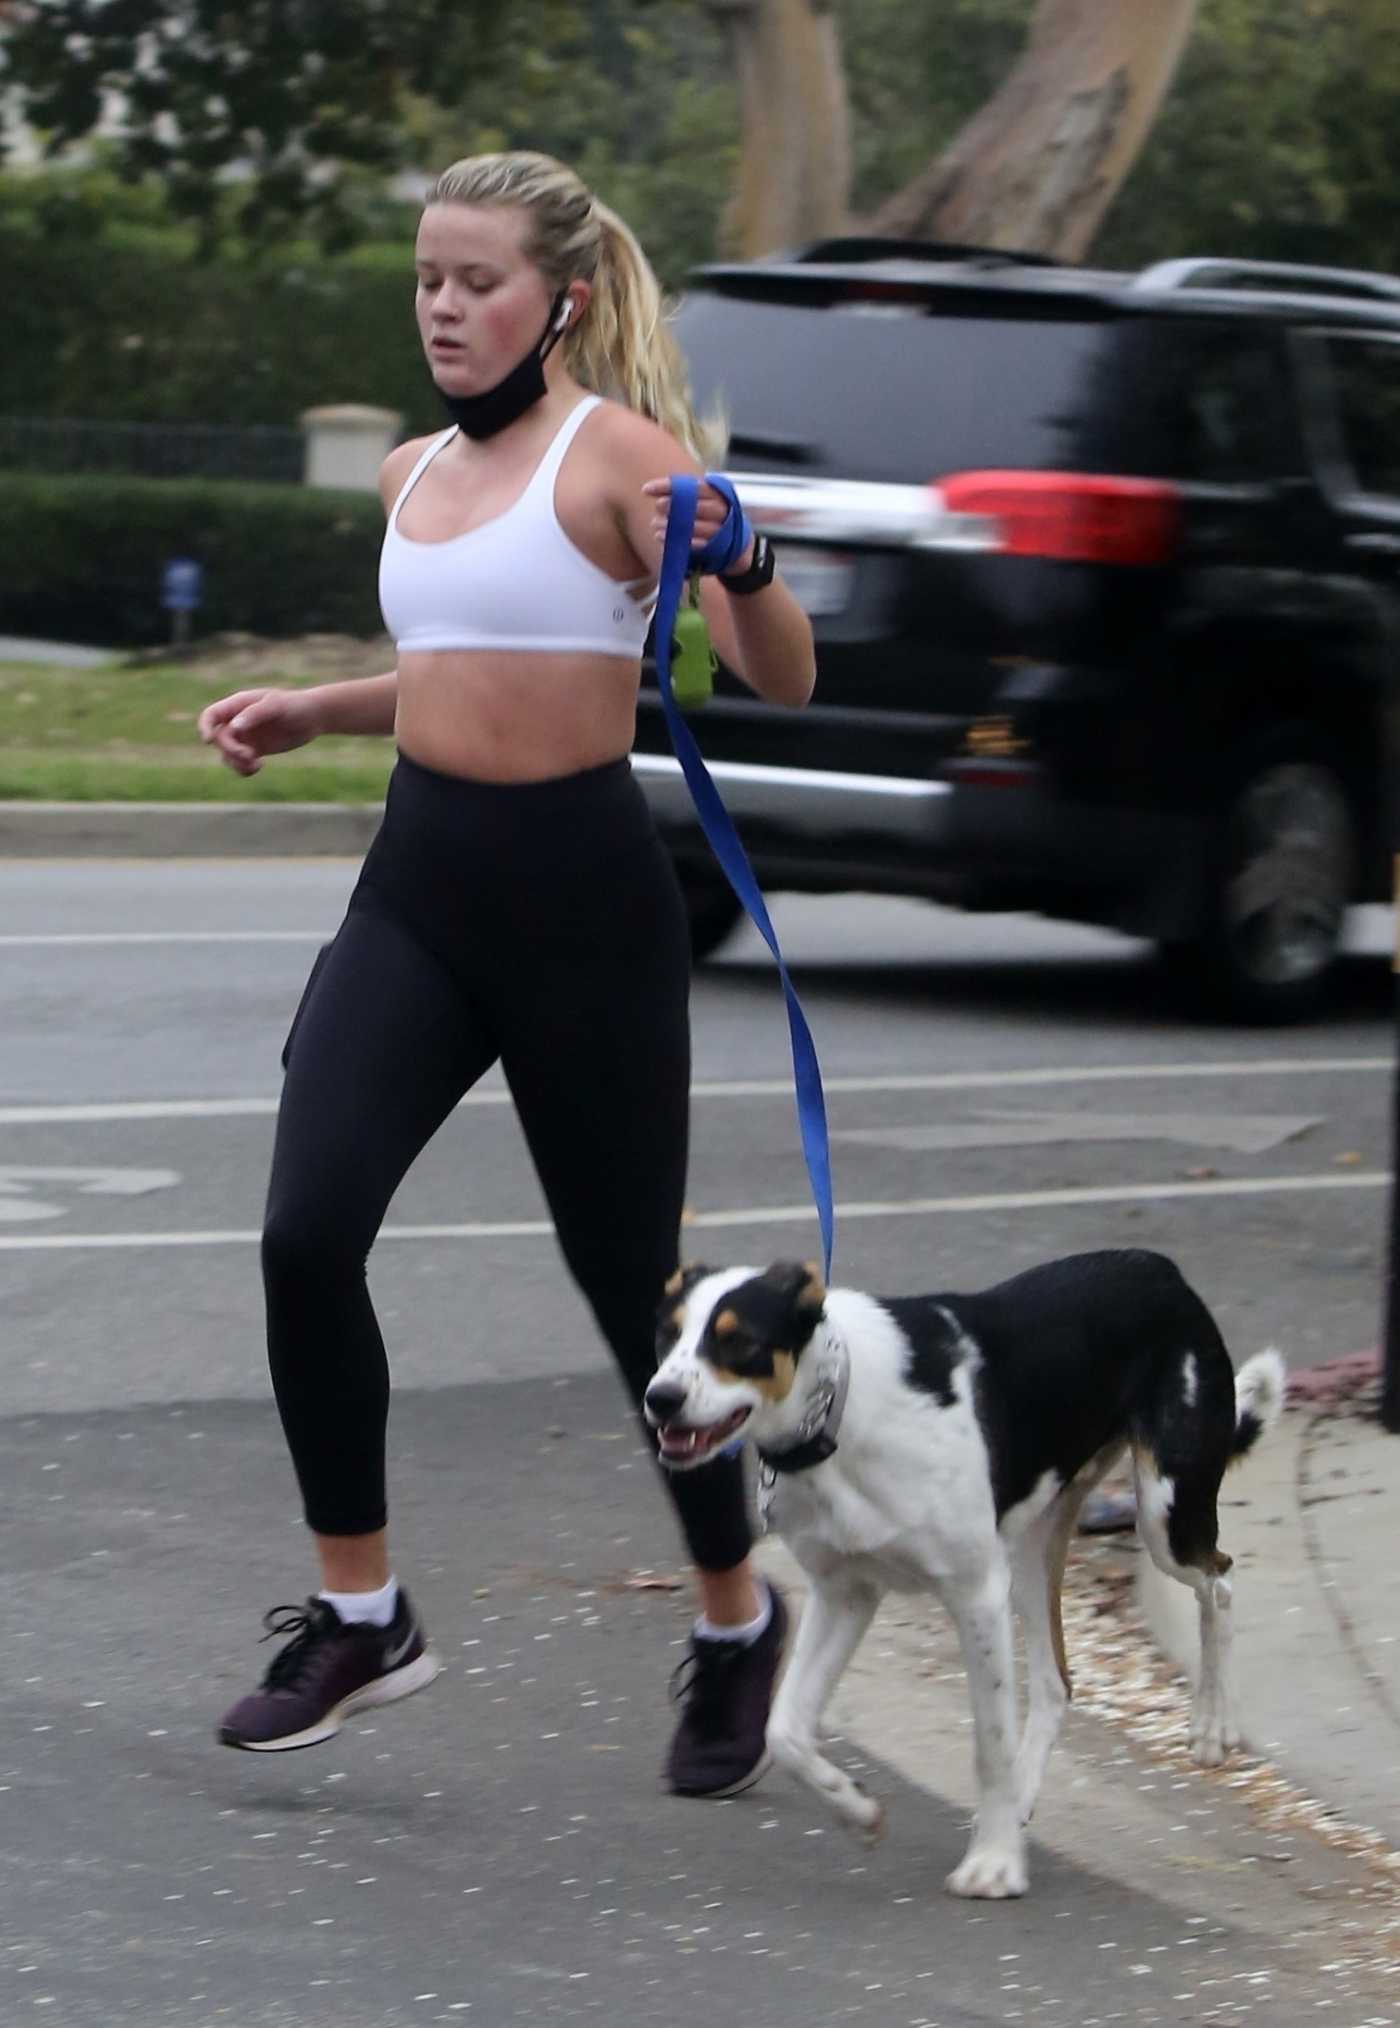 Ava Phillippe in a White Sports Bra Goes Jogging with Her Dog in Los Angeles 02/09/2021